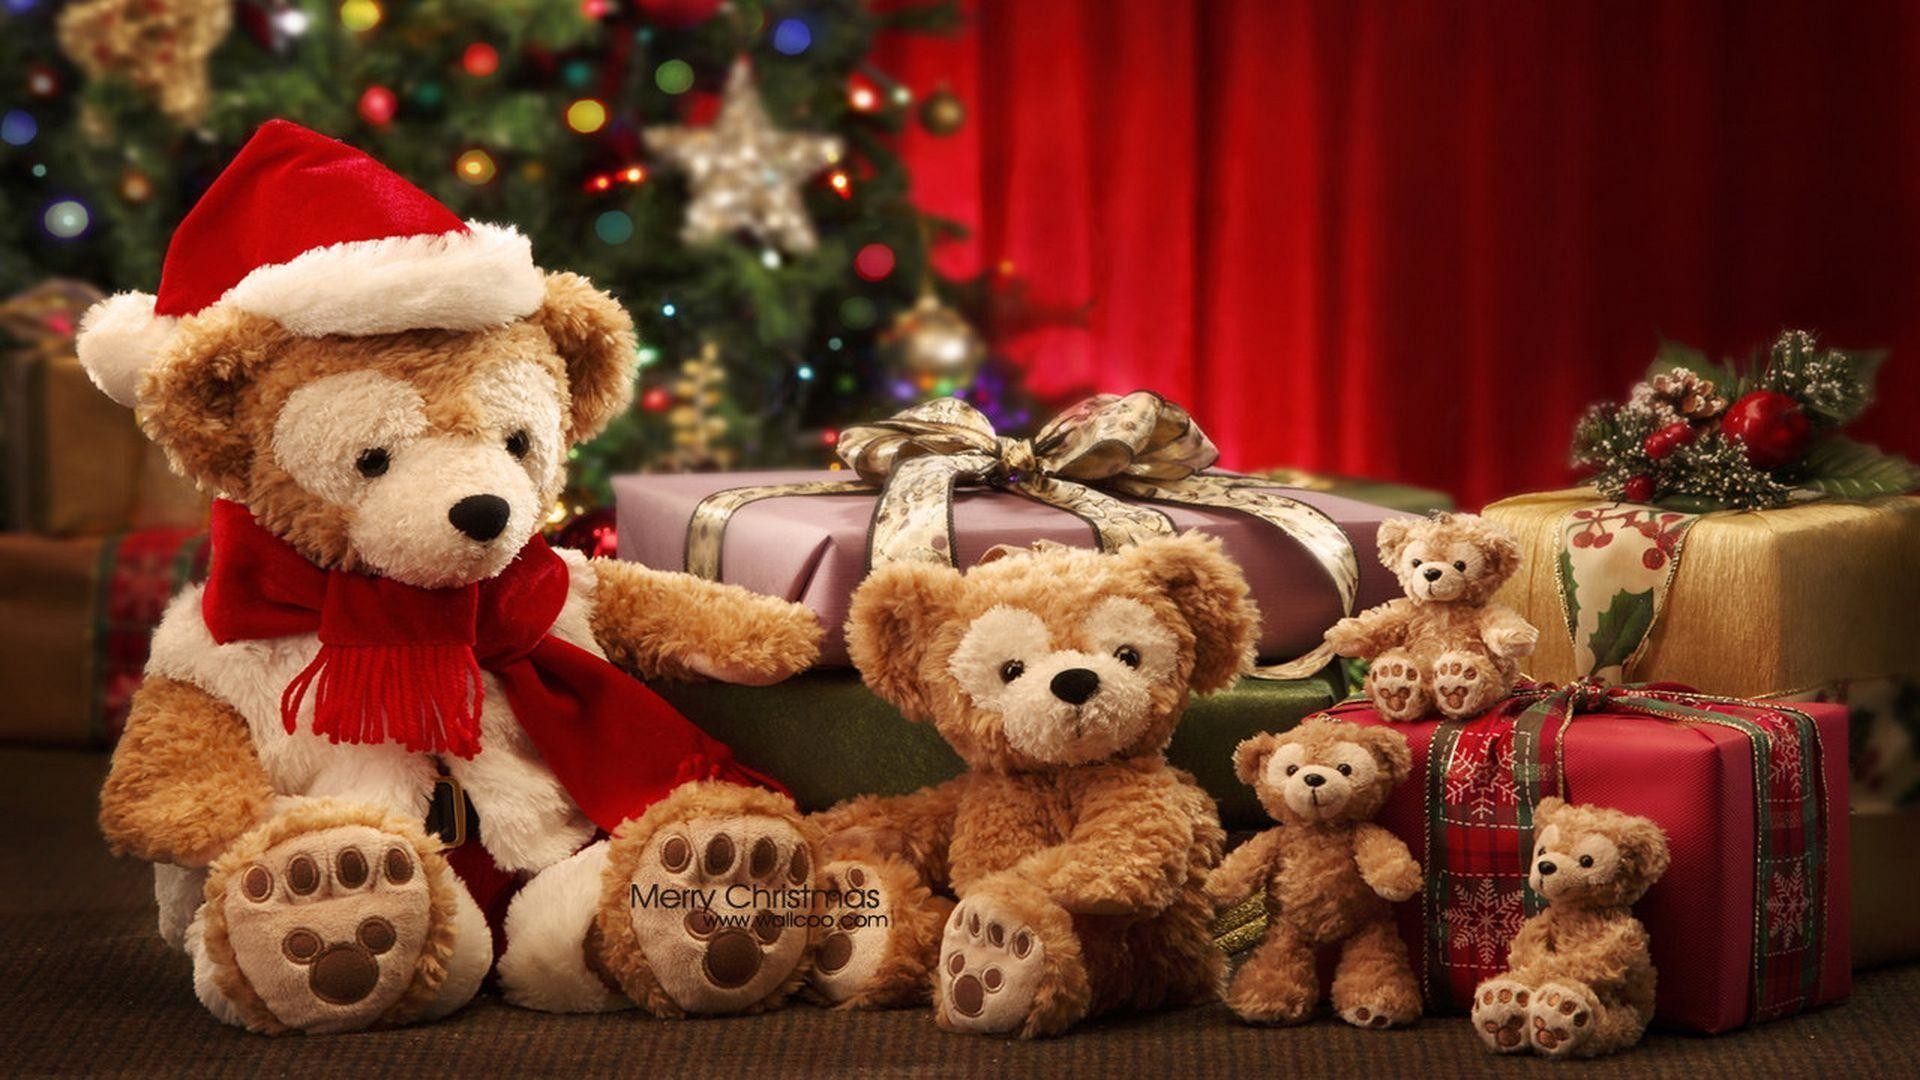 1920x1080 Wallpapers For > Cute Christmas Wallpapers Hd